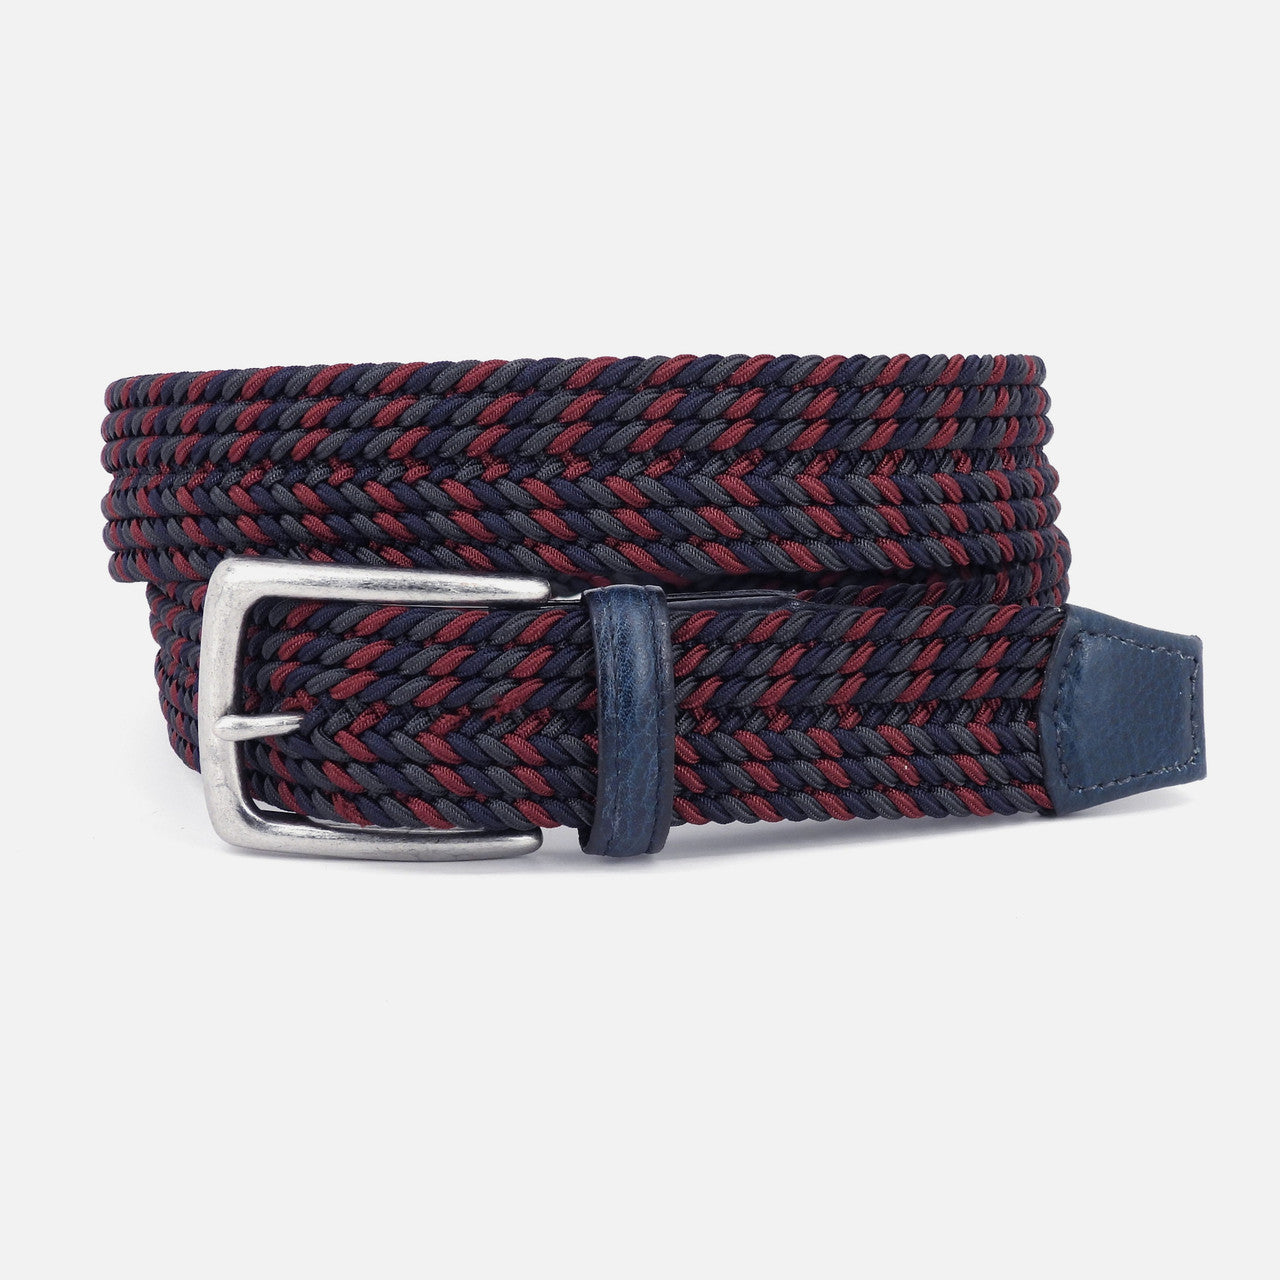 Italian Braided Stretch Rayon Casual Belt in Navy, Burgundy, and Grey by Torino Leather